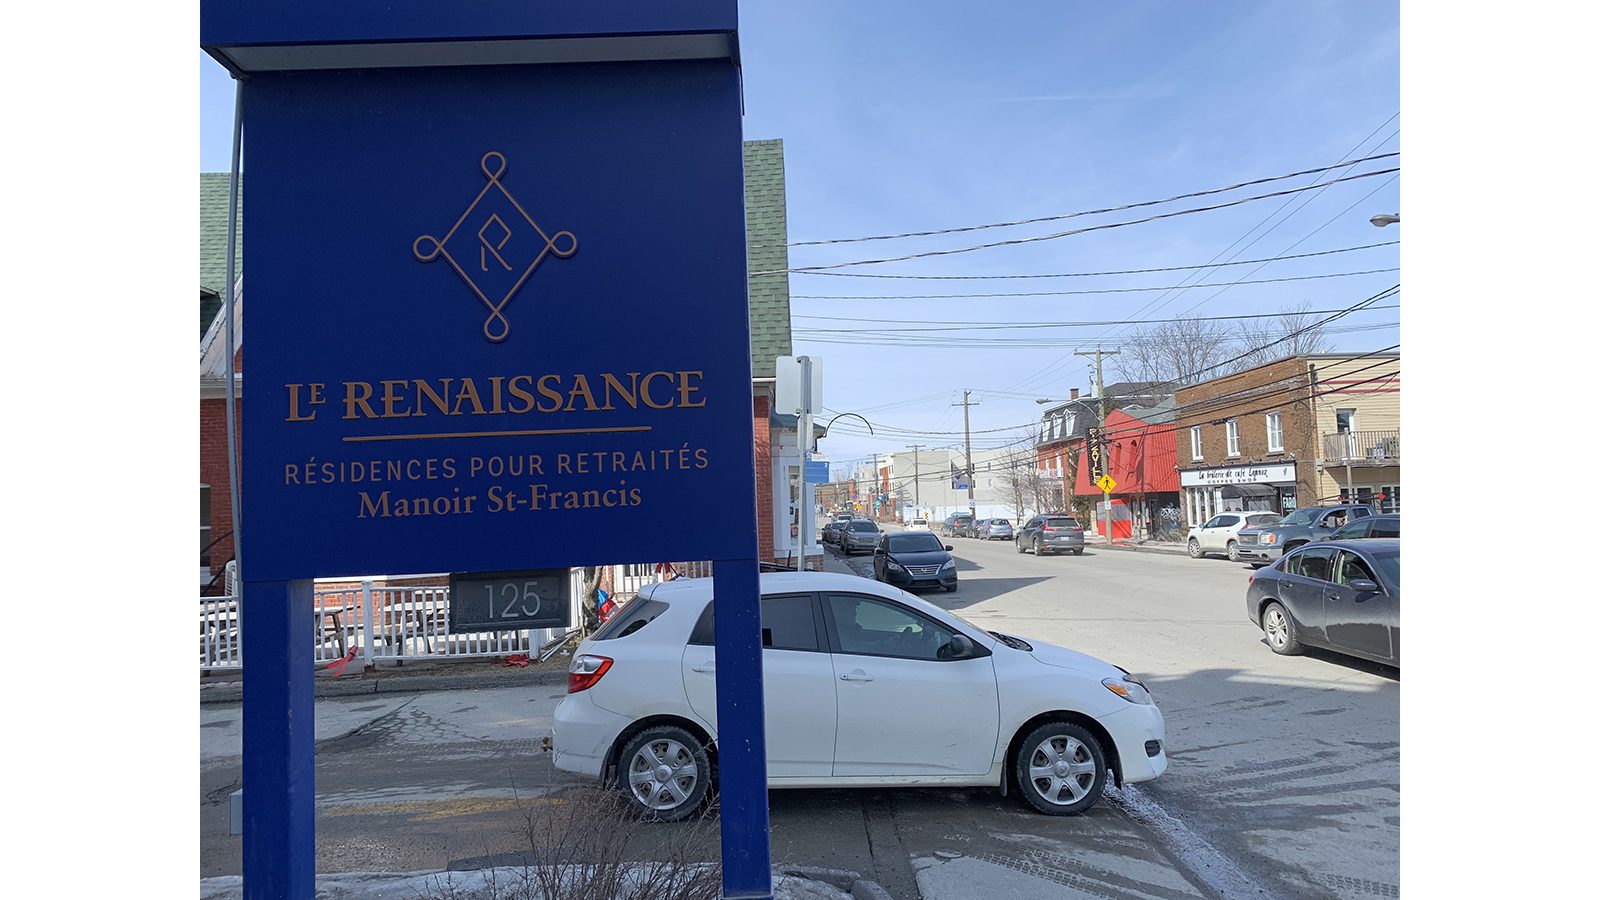 St-Francis Manor residents file ­petition regarding Queen Street parking